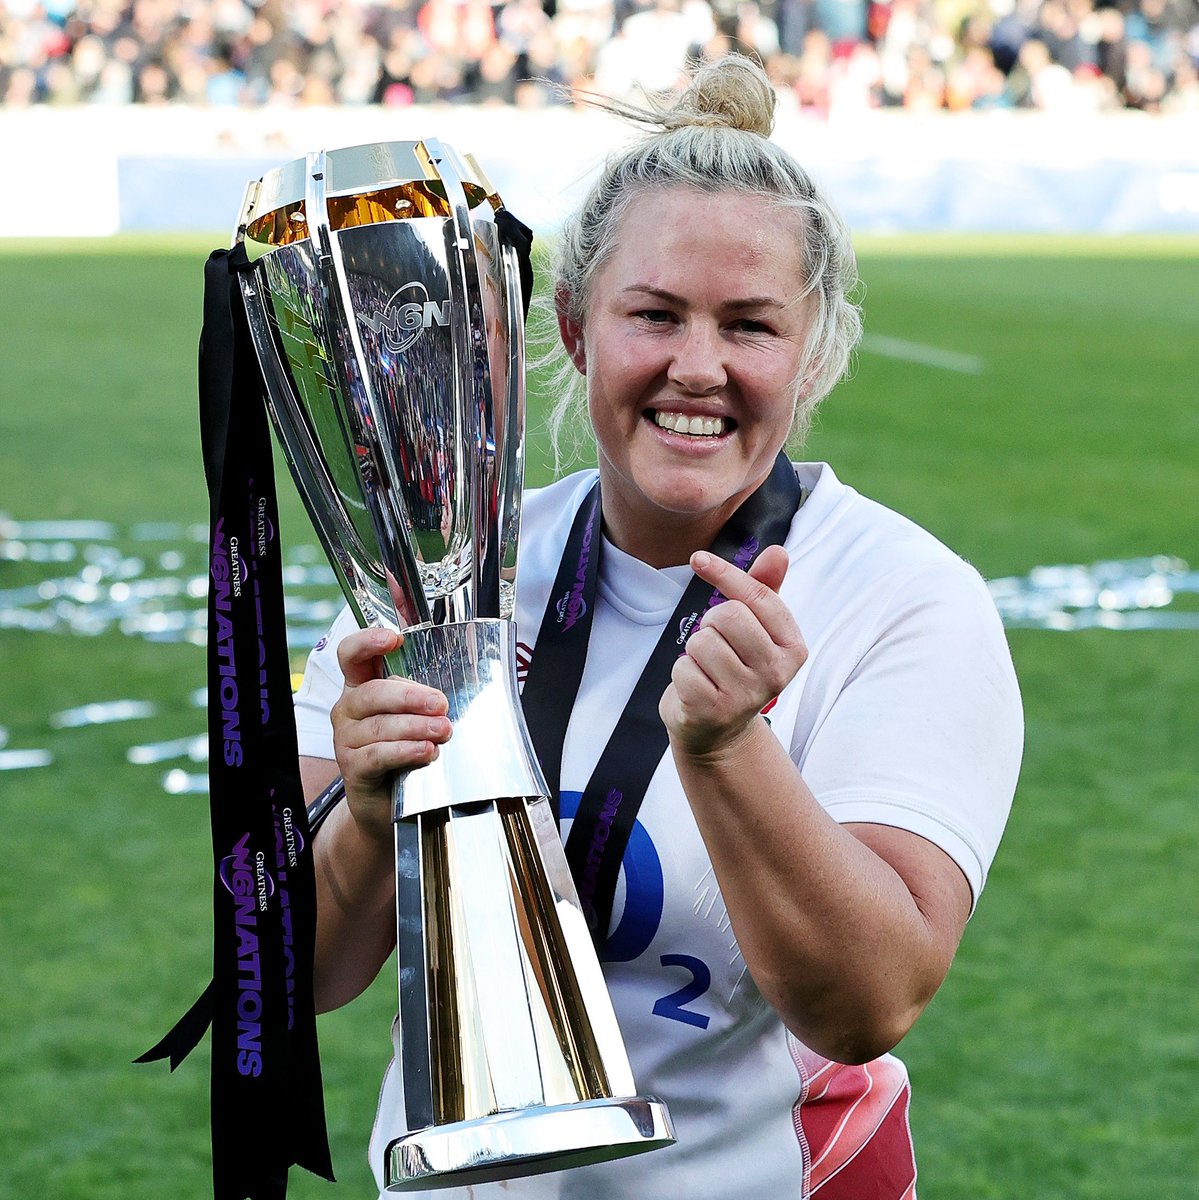 You love to see it @marliepacker! 😍 #YourSaracens💫